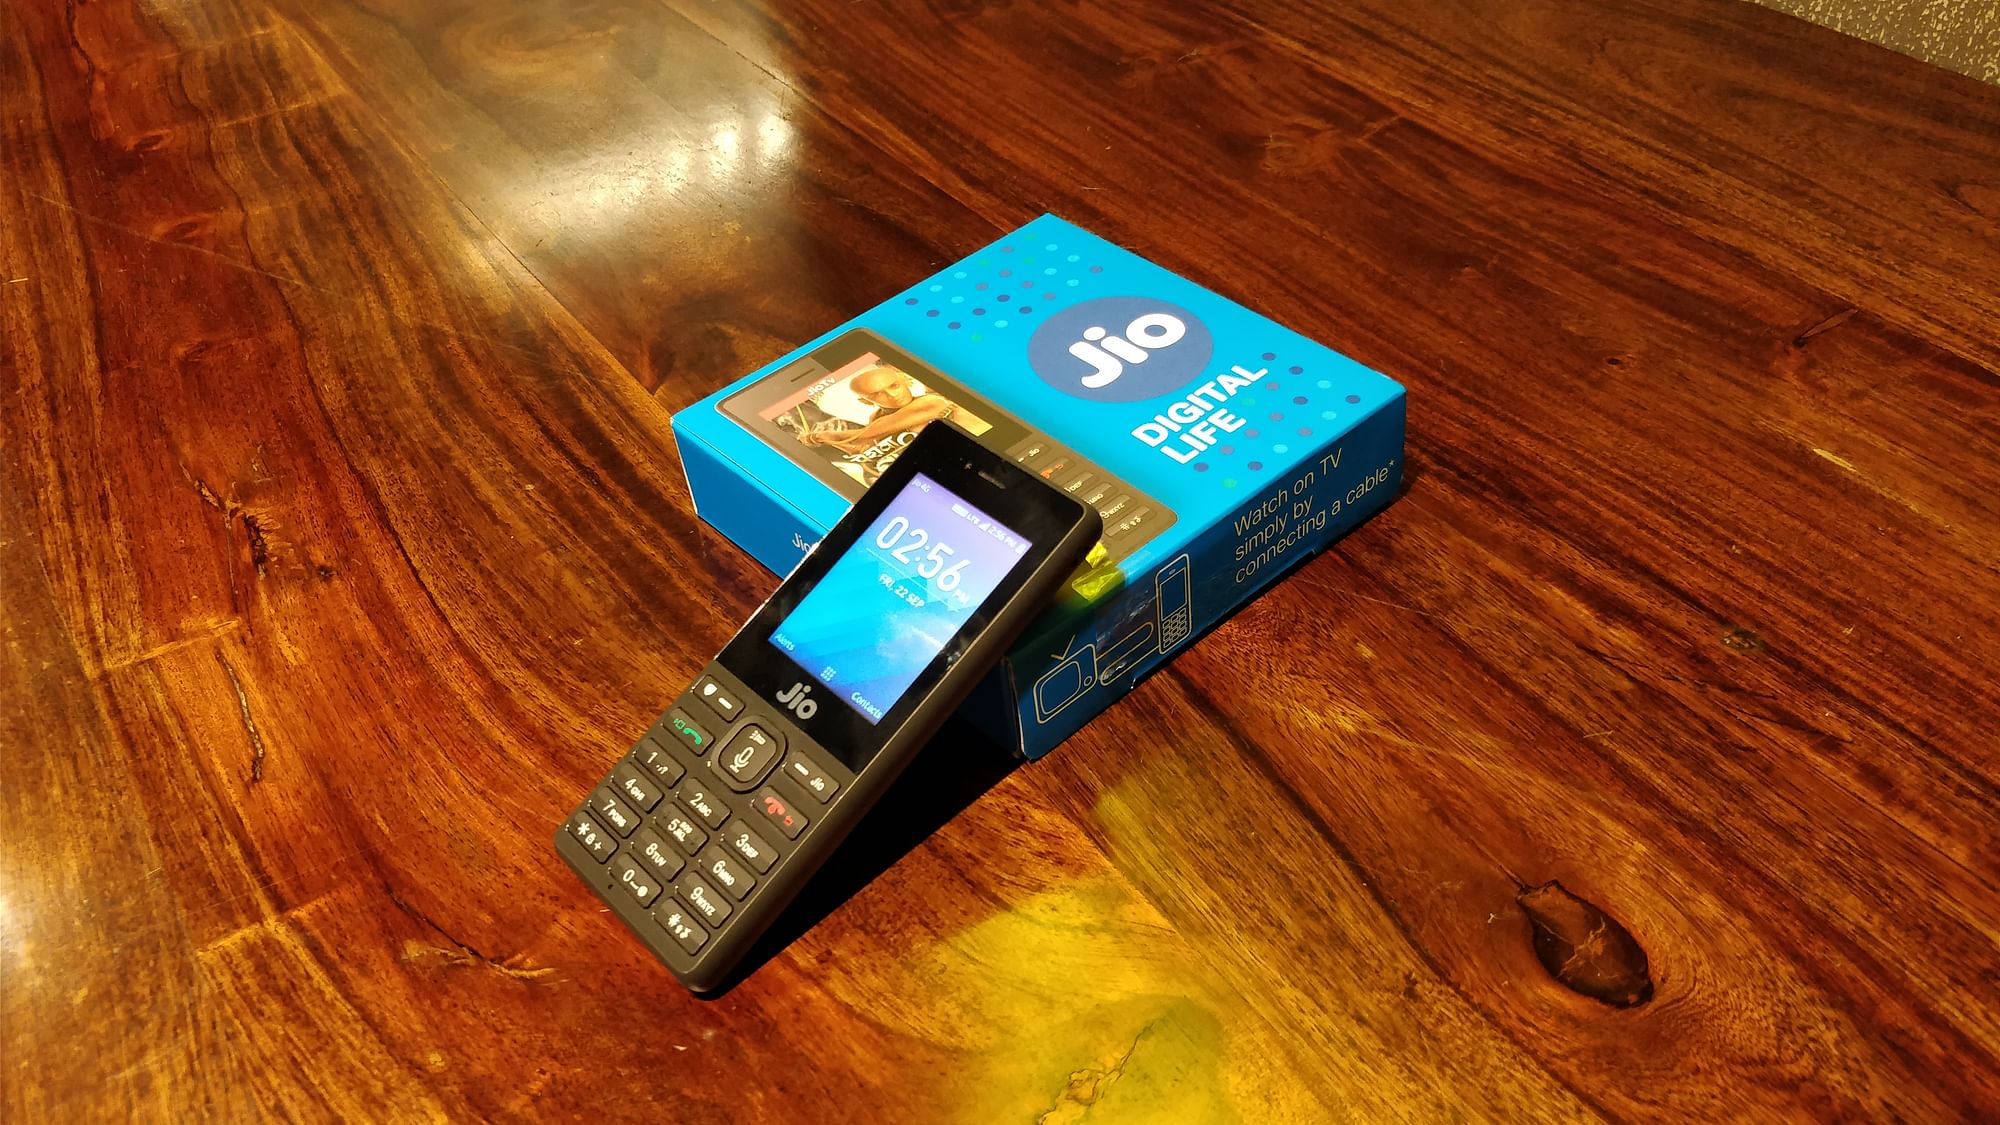 The Reliance Jio Phone unboxed